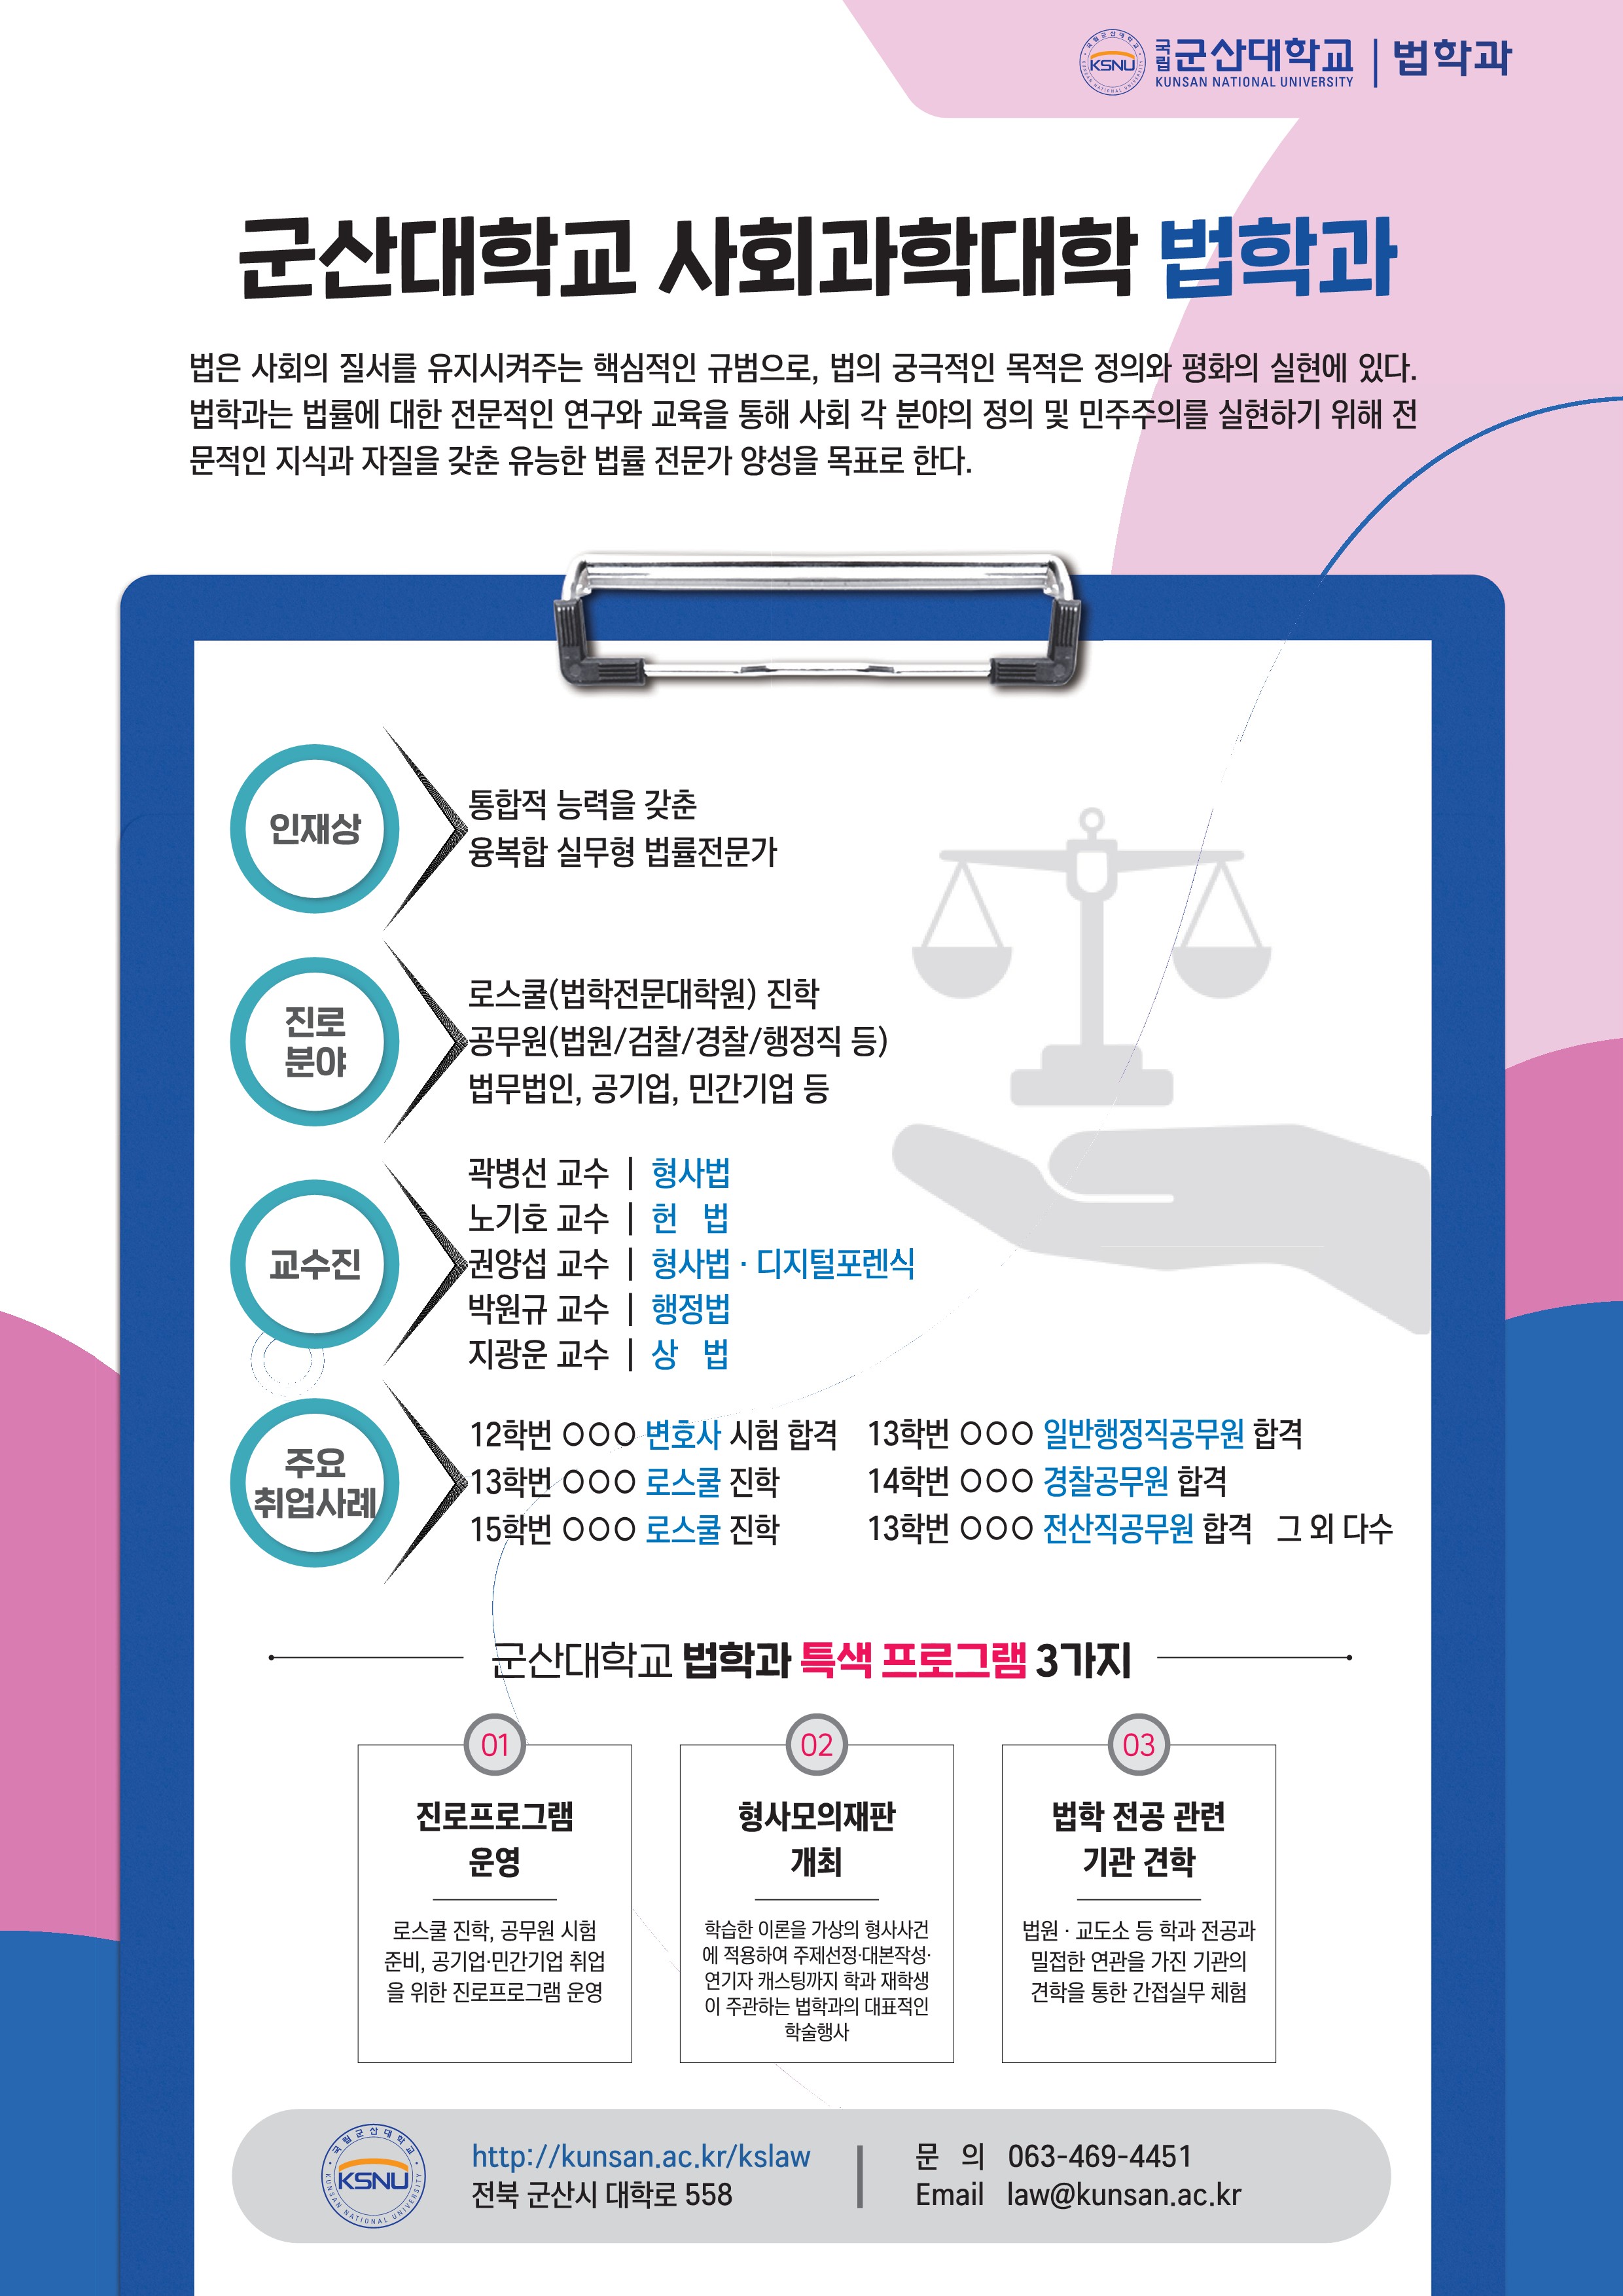 ONE PAGE 소개